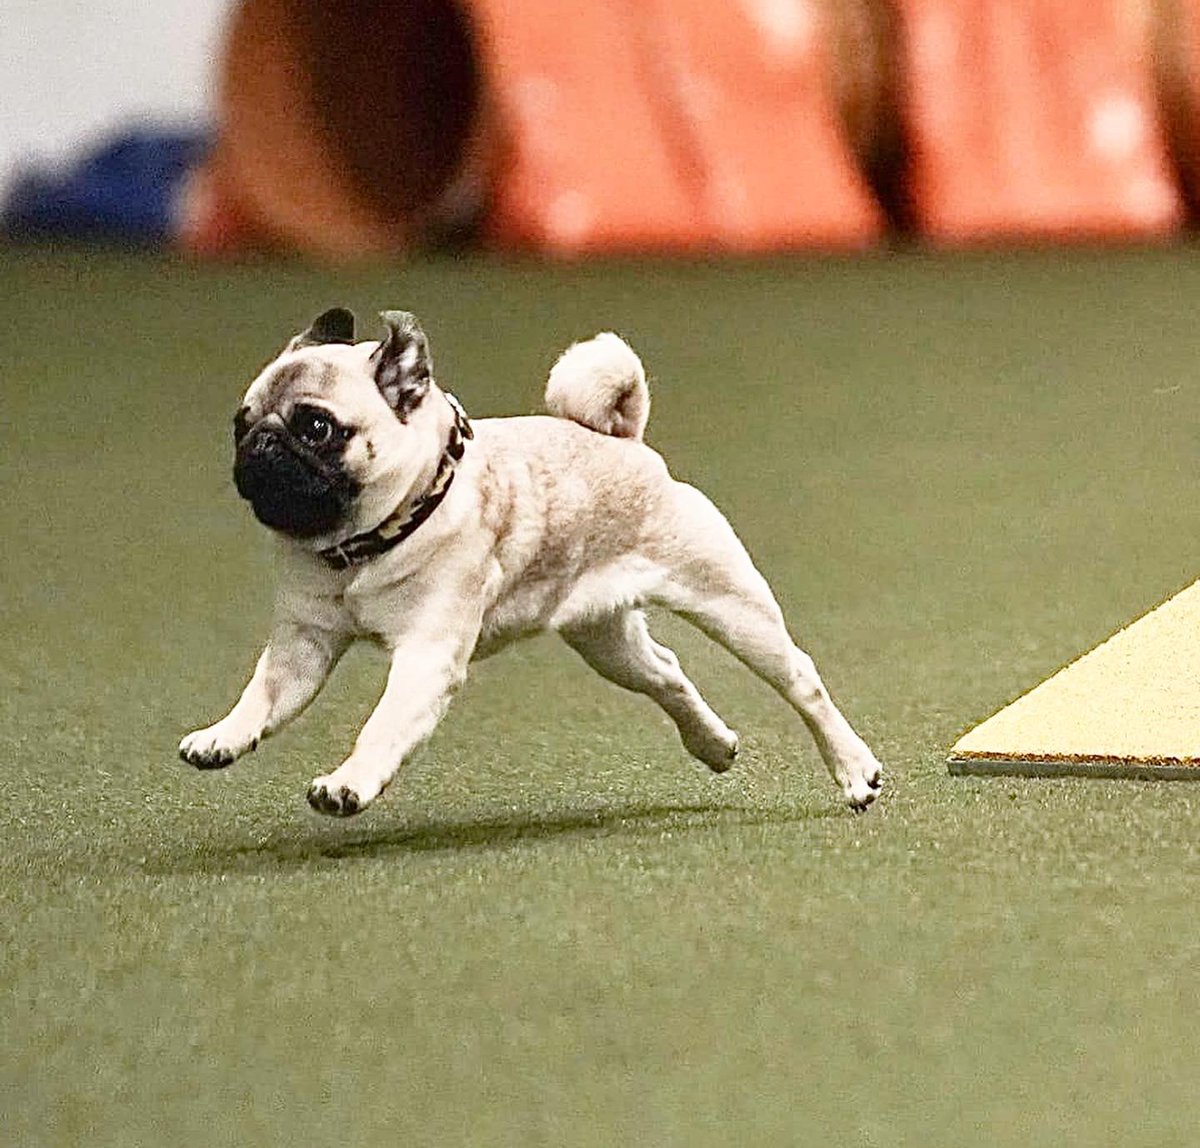 Who says pugs can’t fly? Or be athletes?? 

Check out these great shots , I’m a lean , mean agility machine 😈🔥🤘 ~ Crowley aka Lil C 

#agilitydog #agility #pug #puglife #dogtraining #fit #athlete #sportsphotography #actionshots